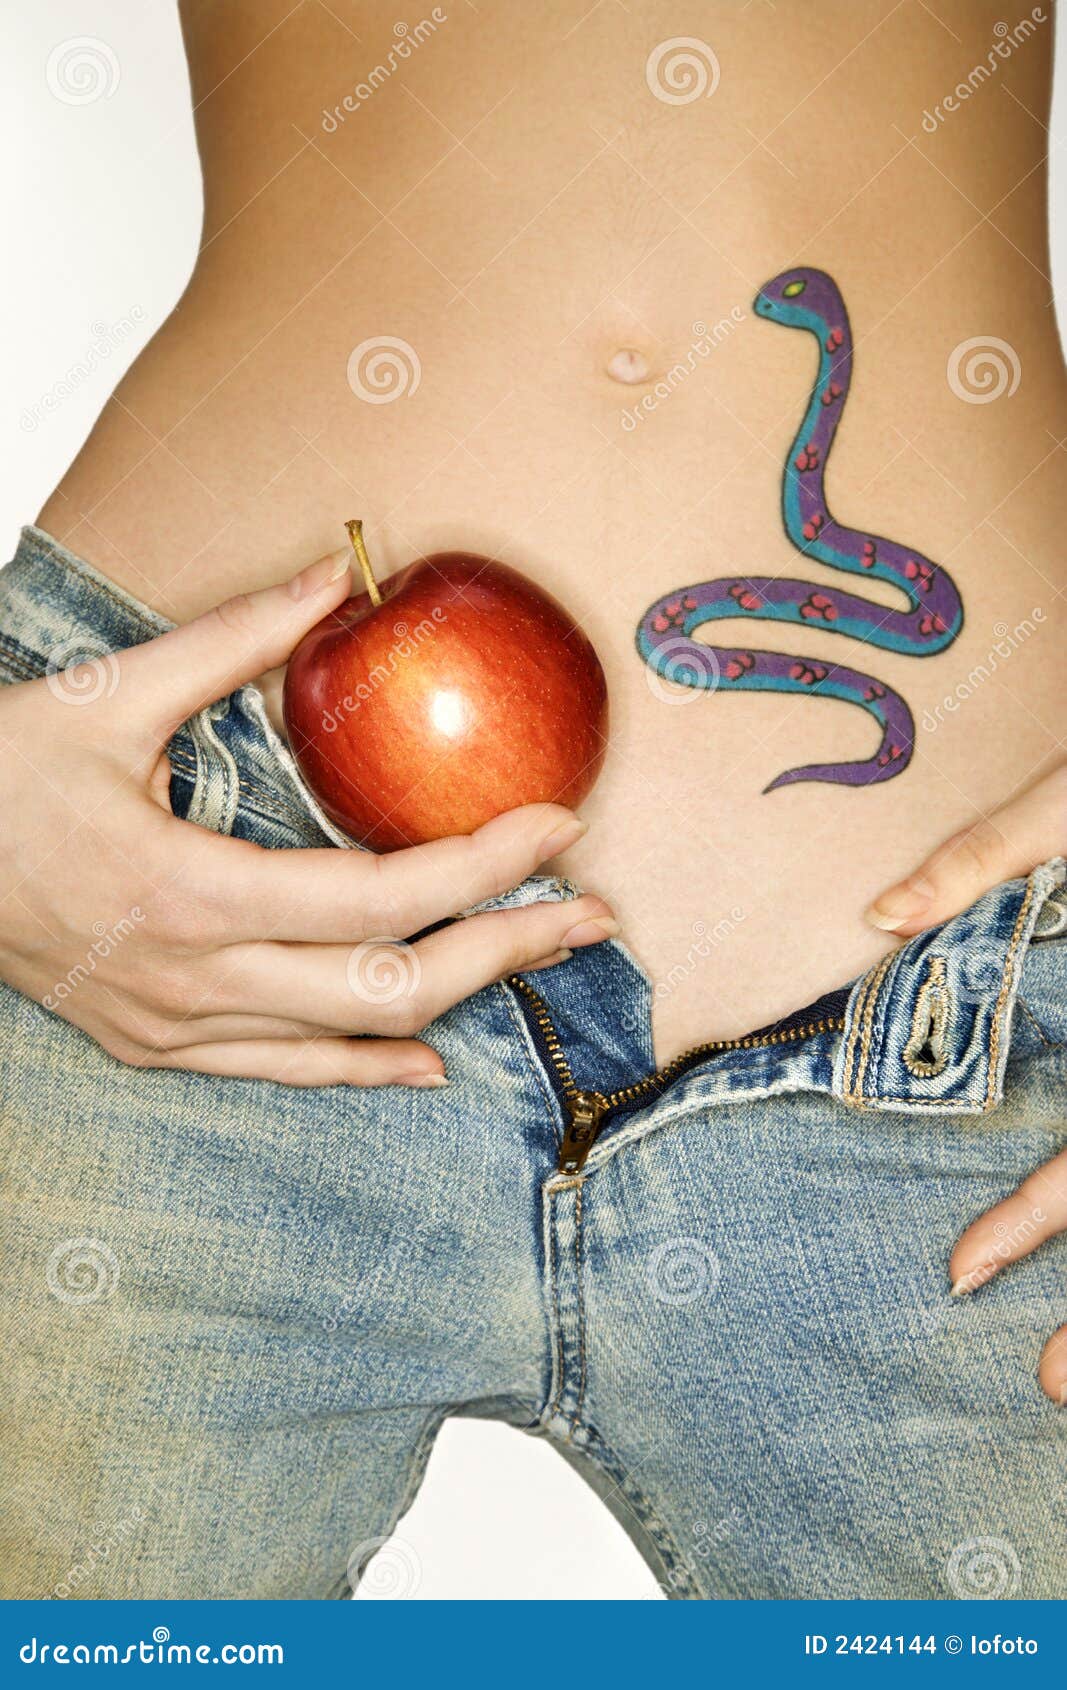 Snake tattoo and apple stock photo Image of forbidden  2424144